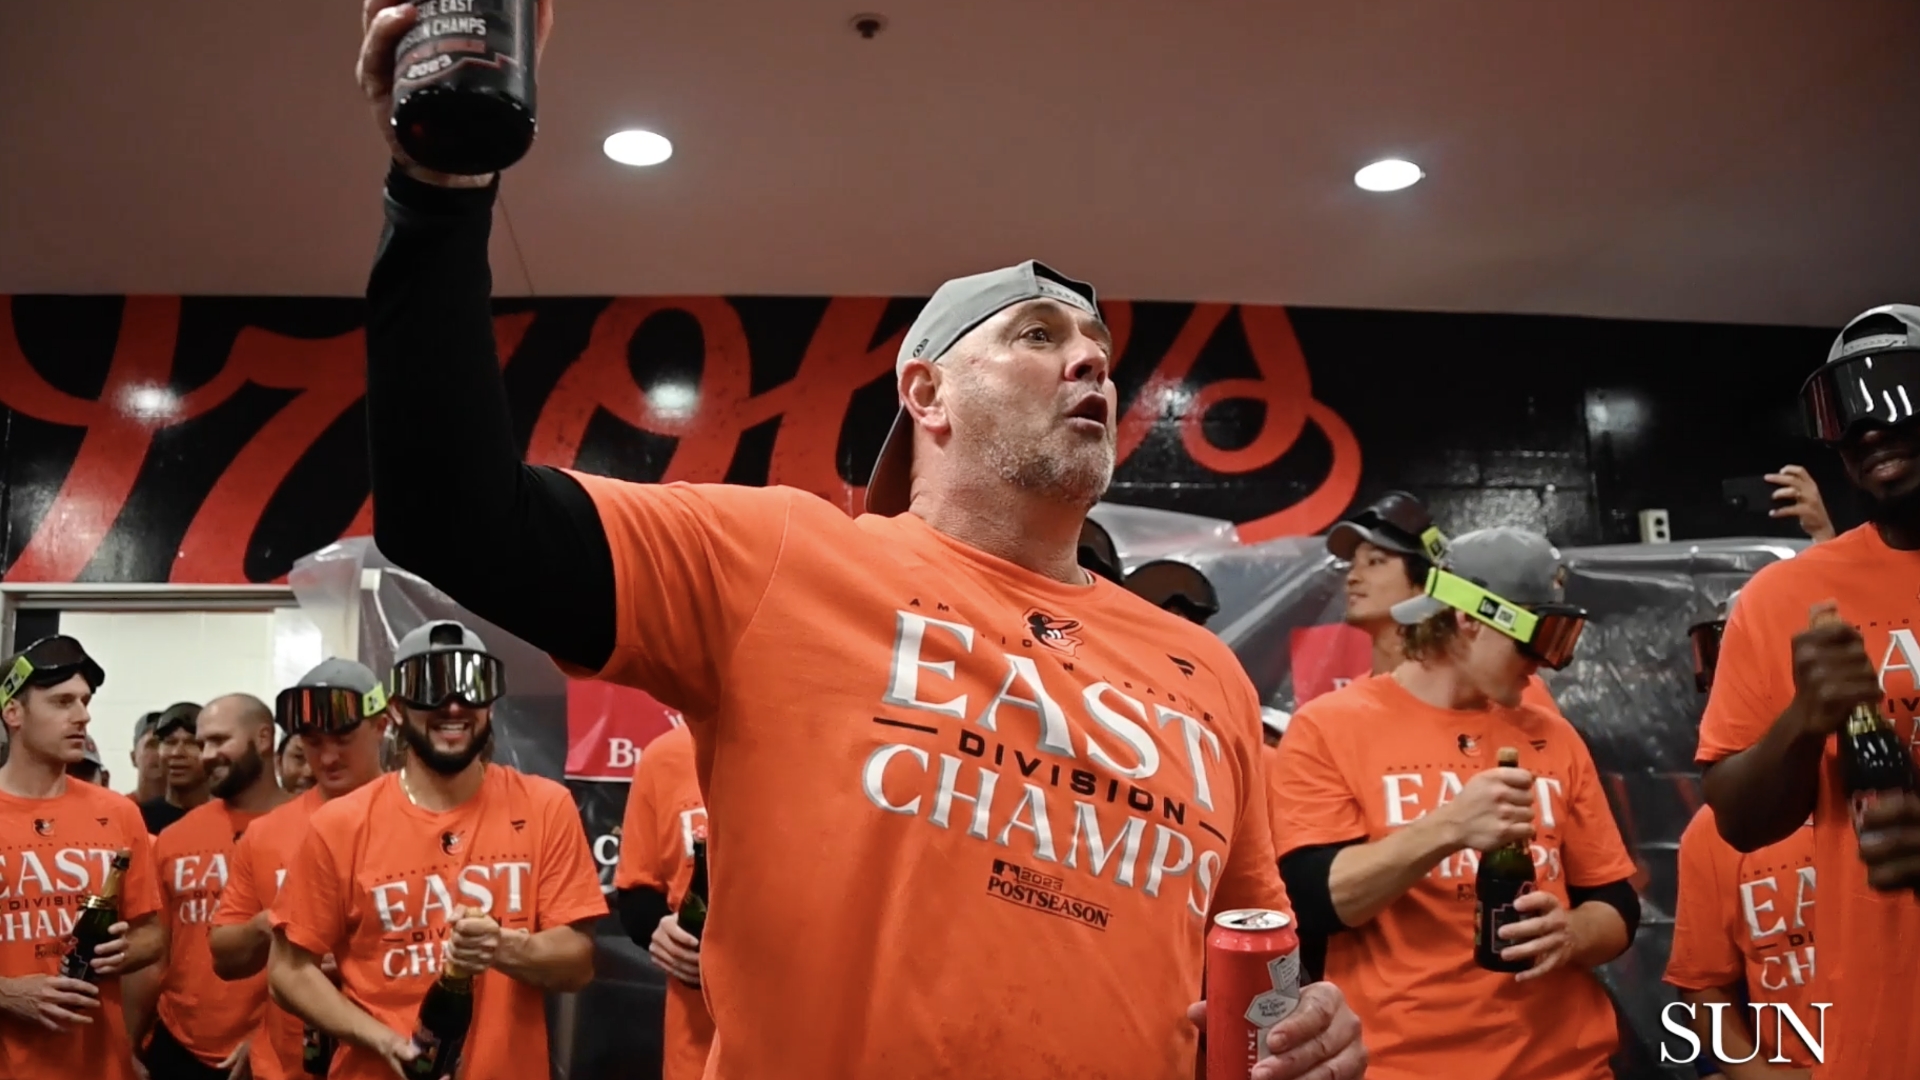 Orioles win AL East, exceeding expectations with unique blend of